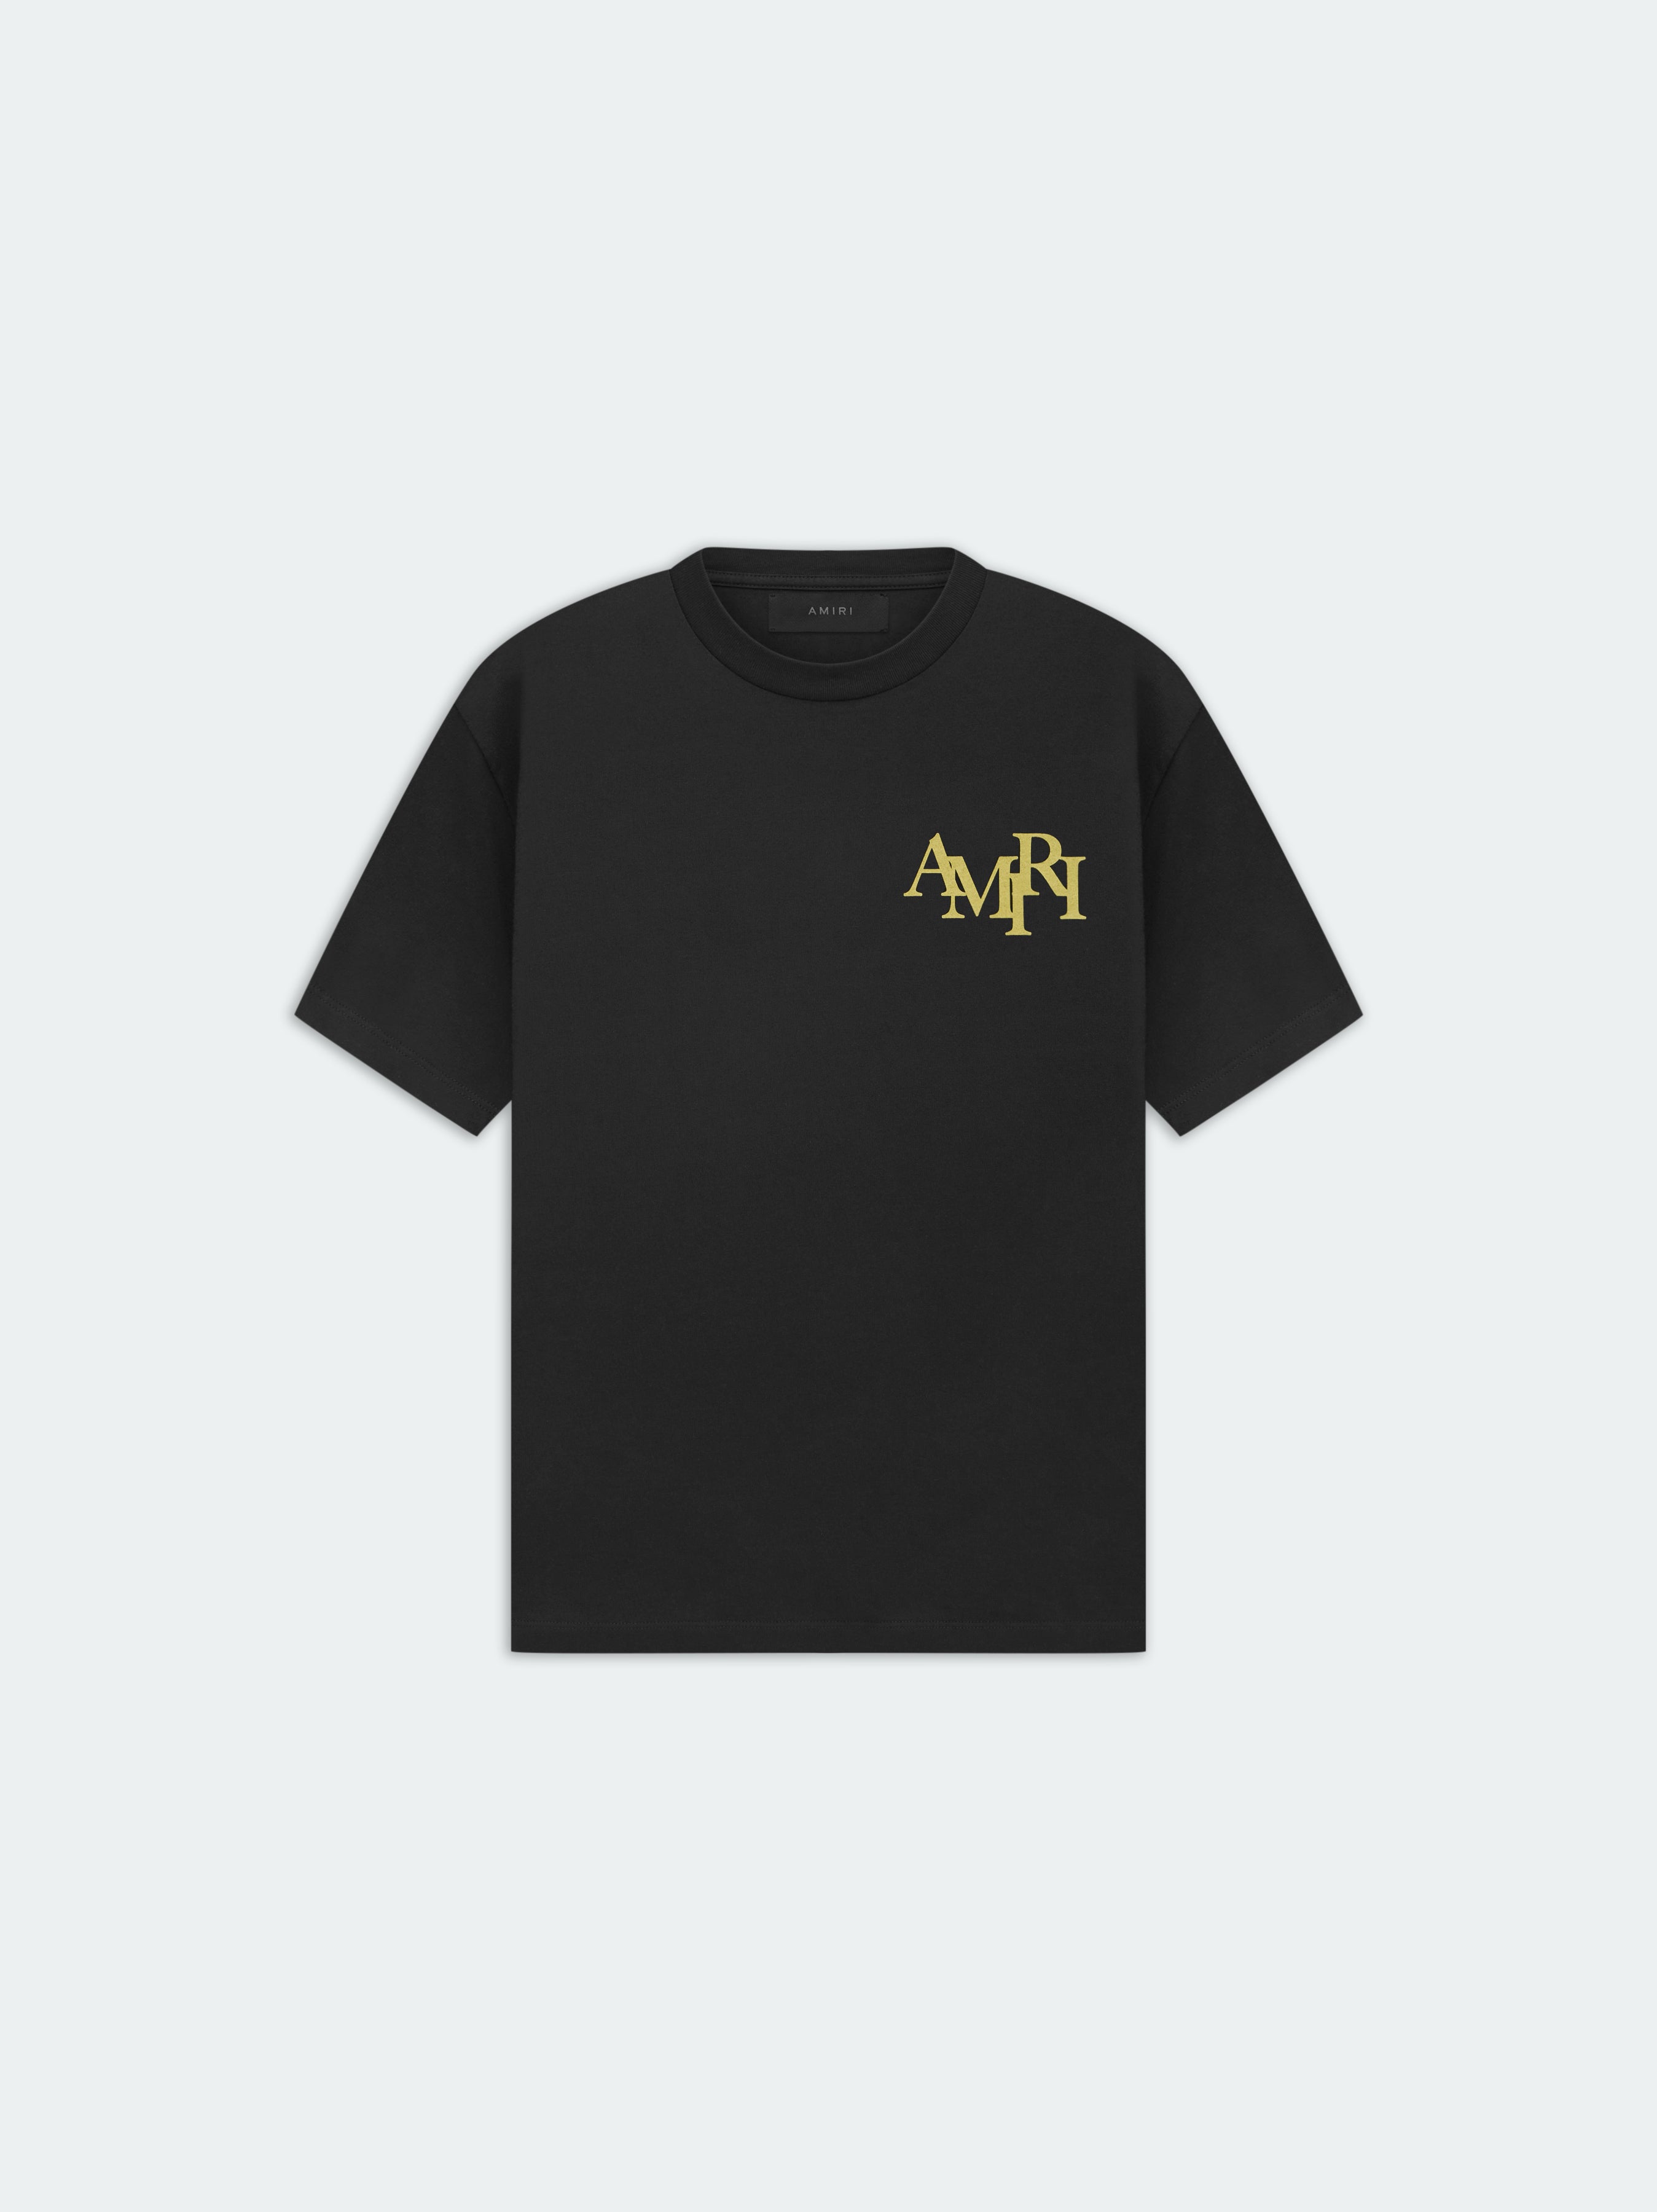 Product CRYSTAL CHAMPAGNE TEE - Black featured image